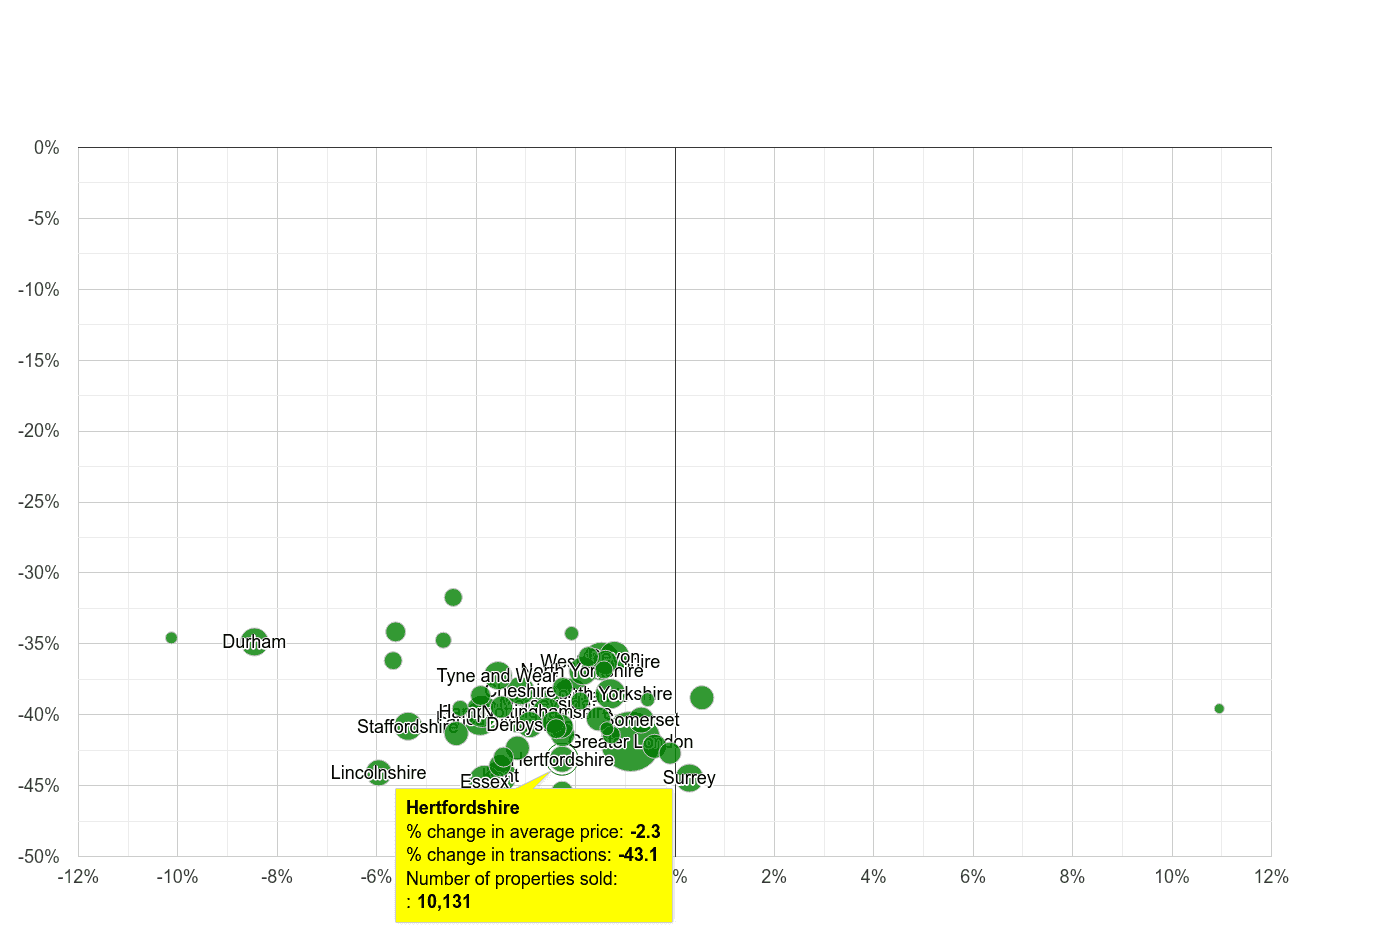 Hertfordshire property price and sales volume change relative to other counties